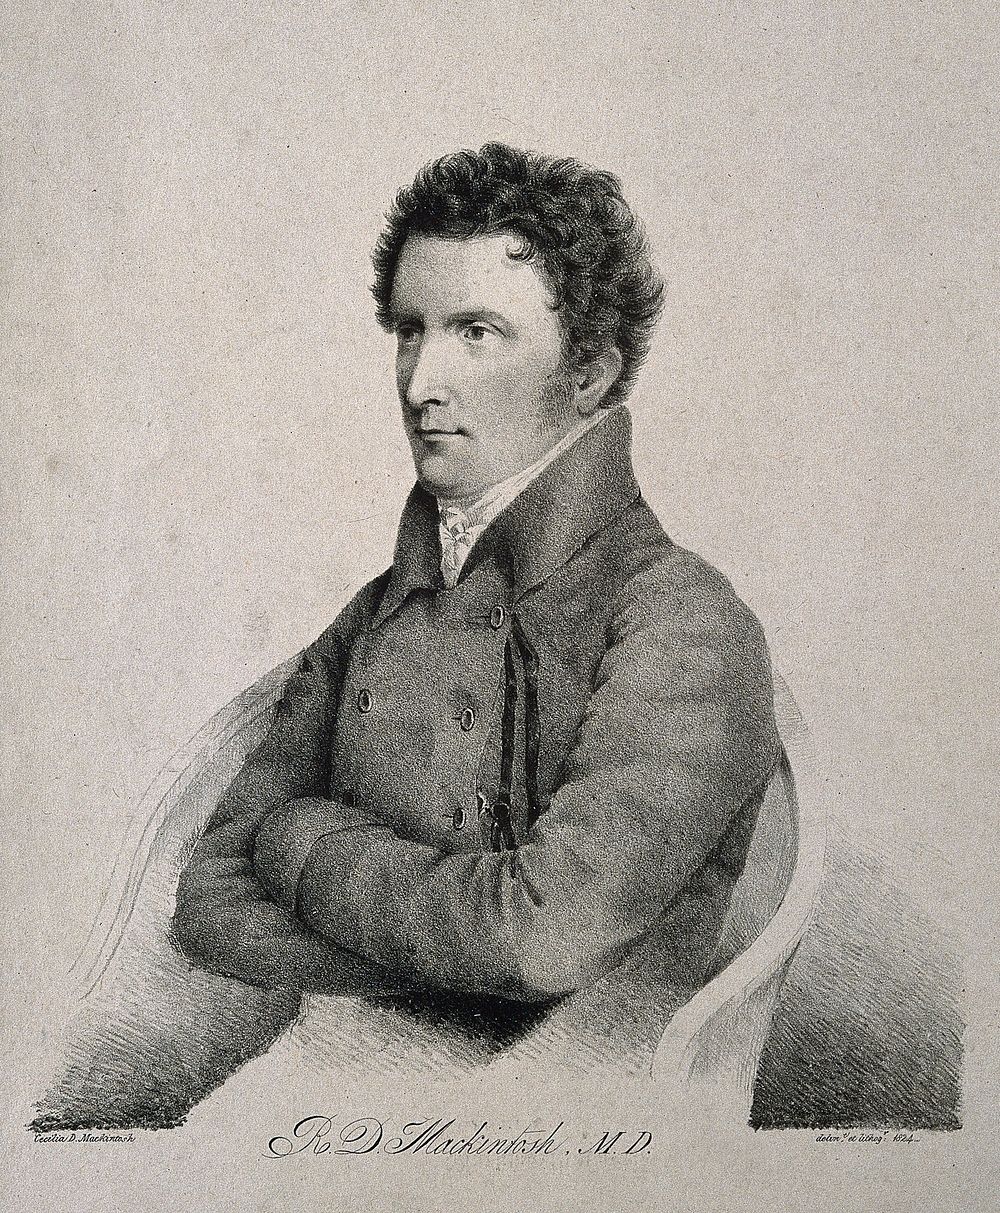 Richard Duncan Mackintosh. Lithograph by Cecilia D. Mackintosh, 1824 after herself.